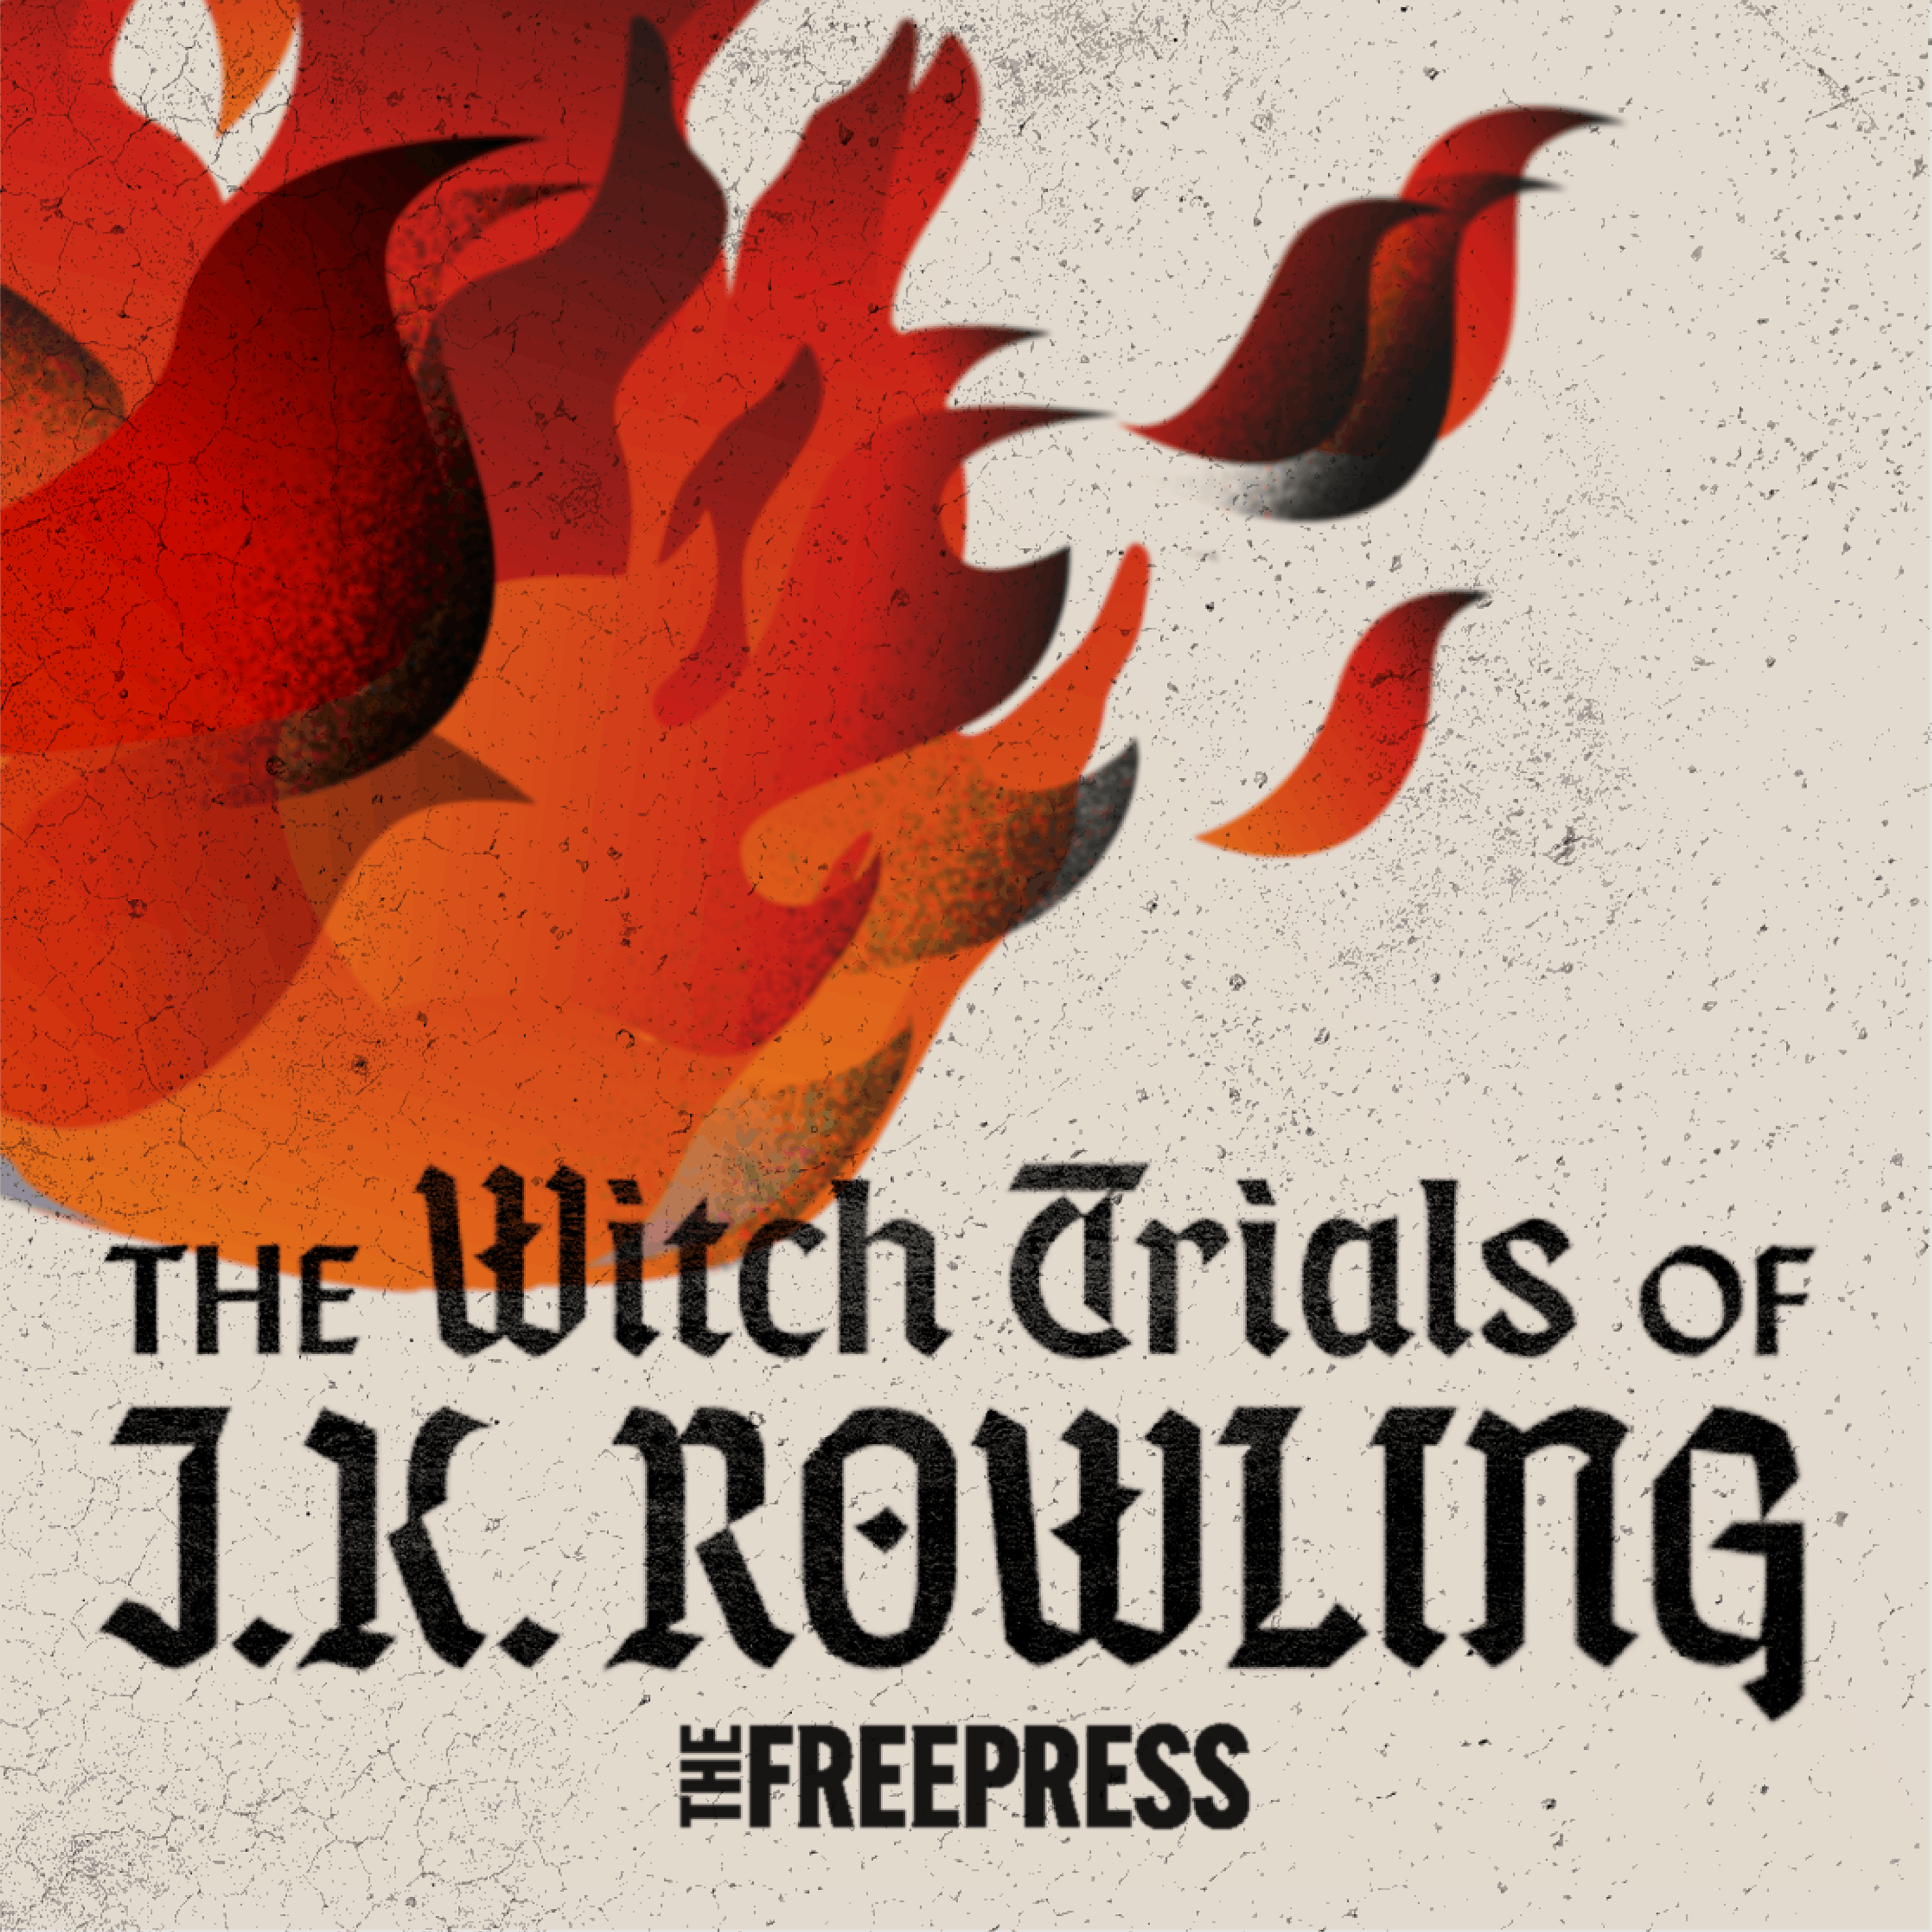 The Witch Trials of J.K. Rowling podcast show image